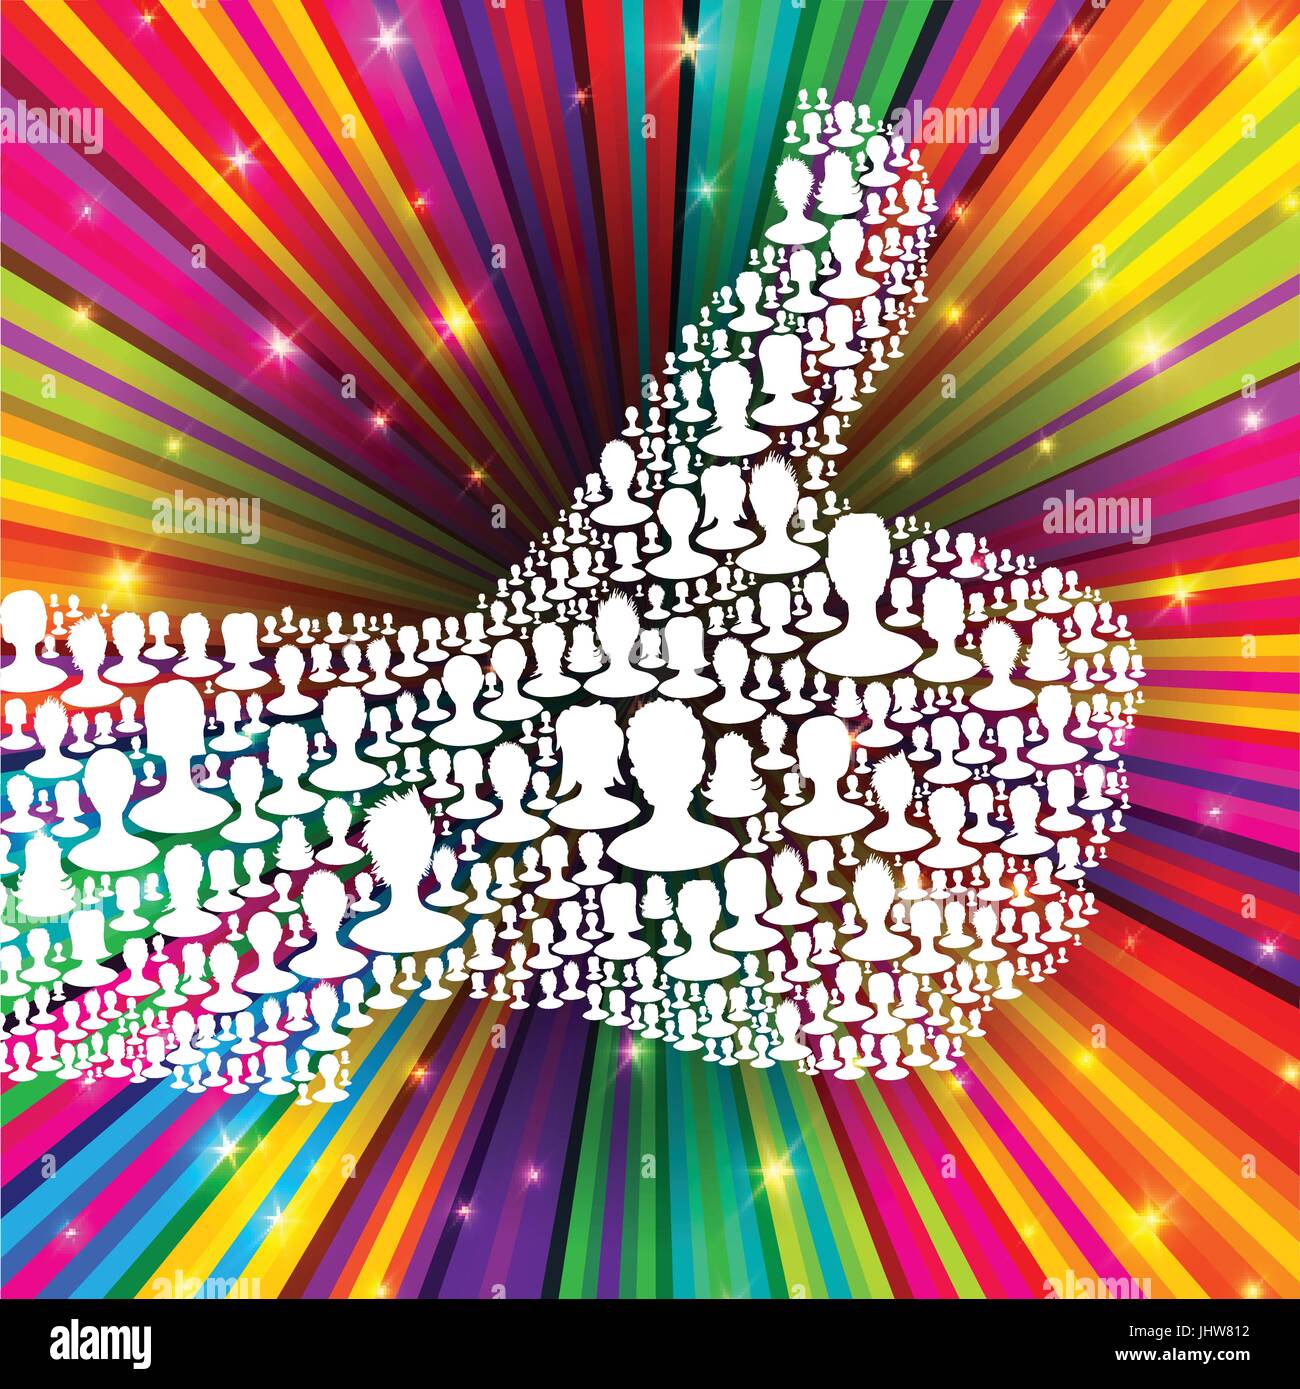 Thumb up symbol on colorful rays background. Composed from many people silhouettes. Vector illustration, EPS10 Stock Vector